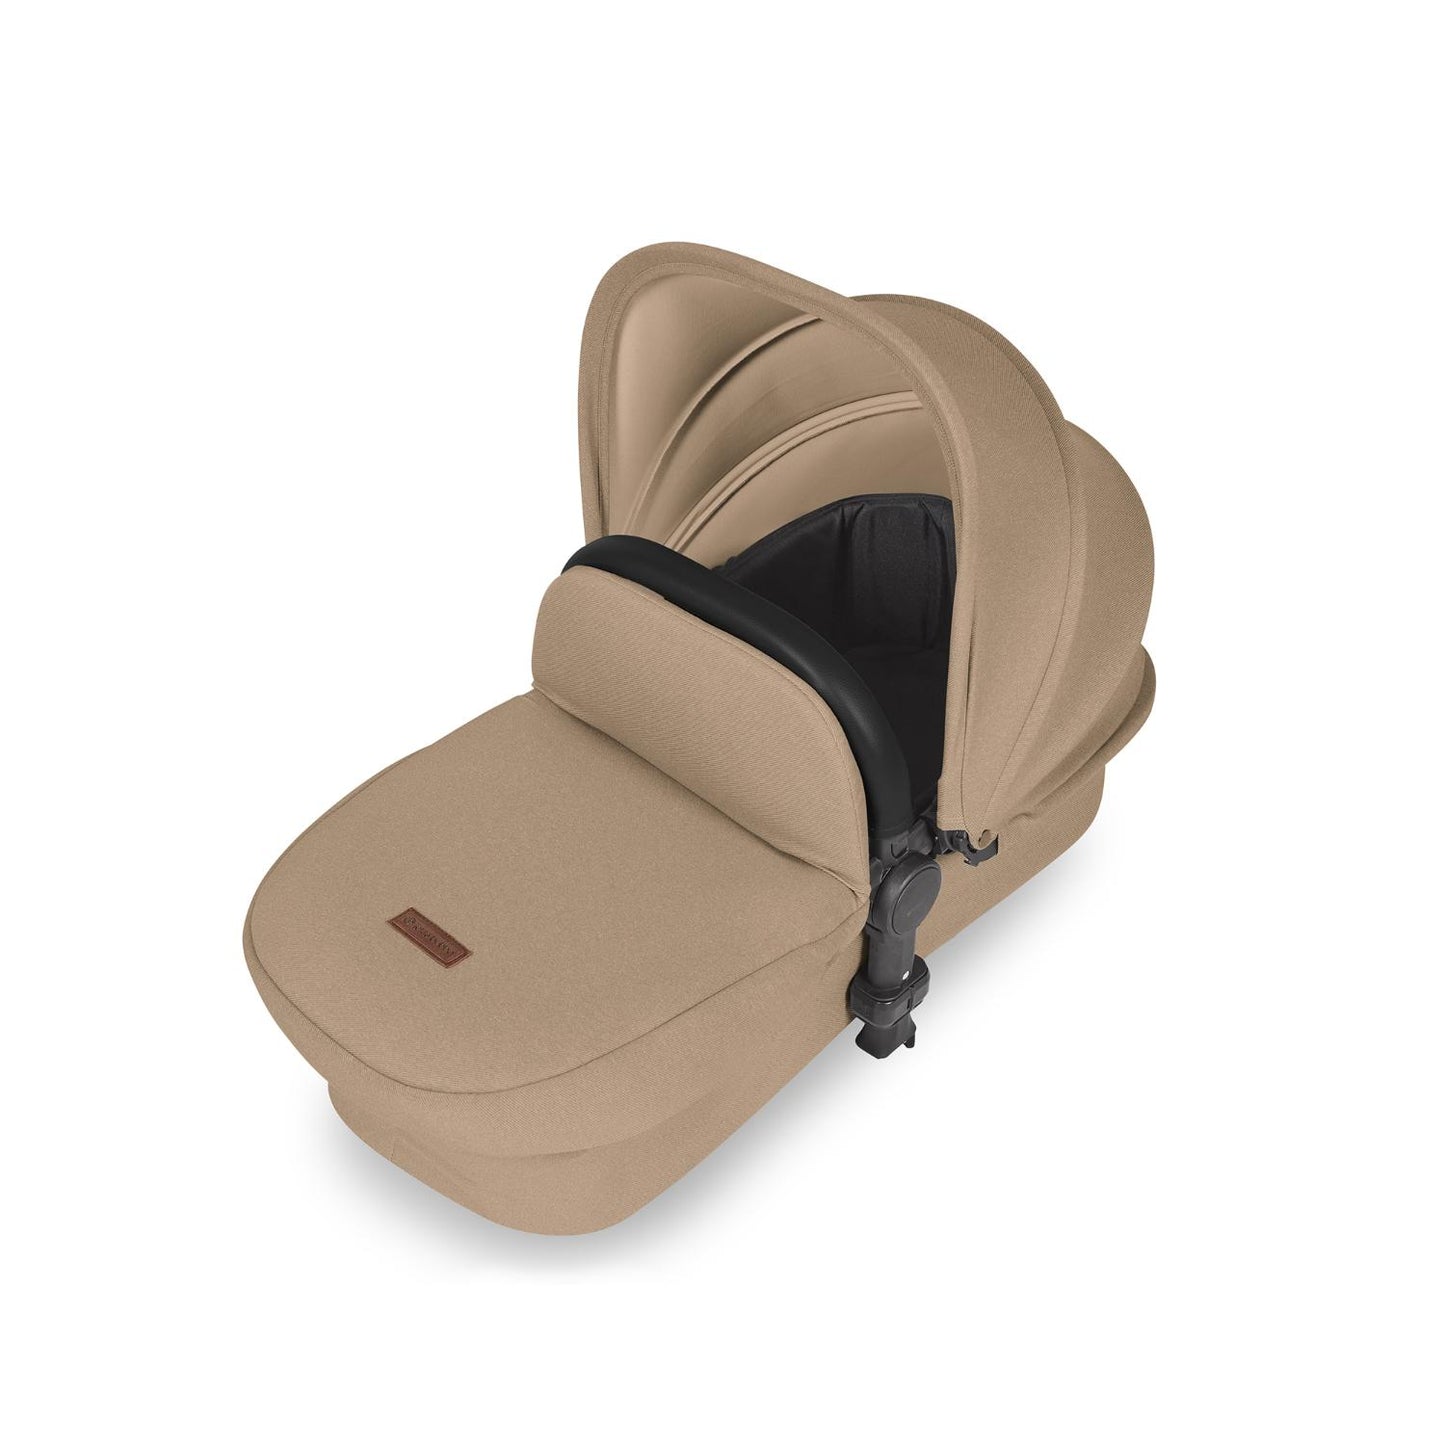 Carrycot in Ickle Bubba Stomp Luxe All-in-One Travel System in Desert beige colour